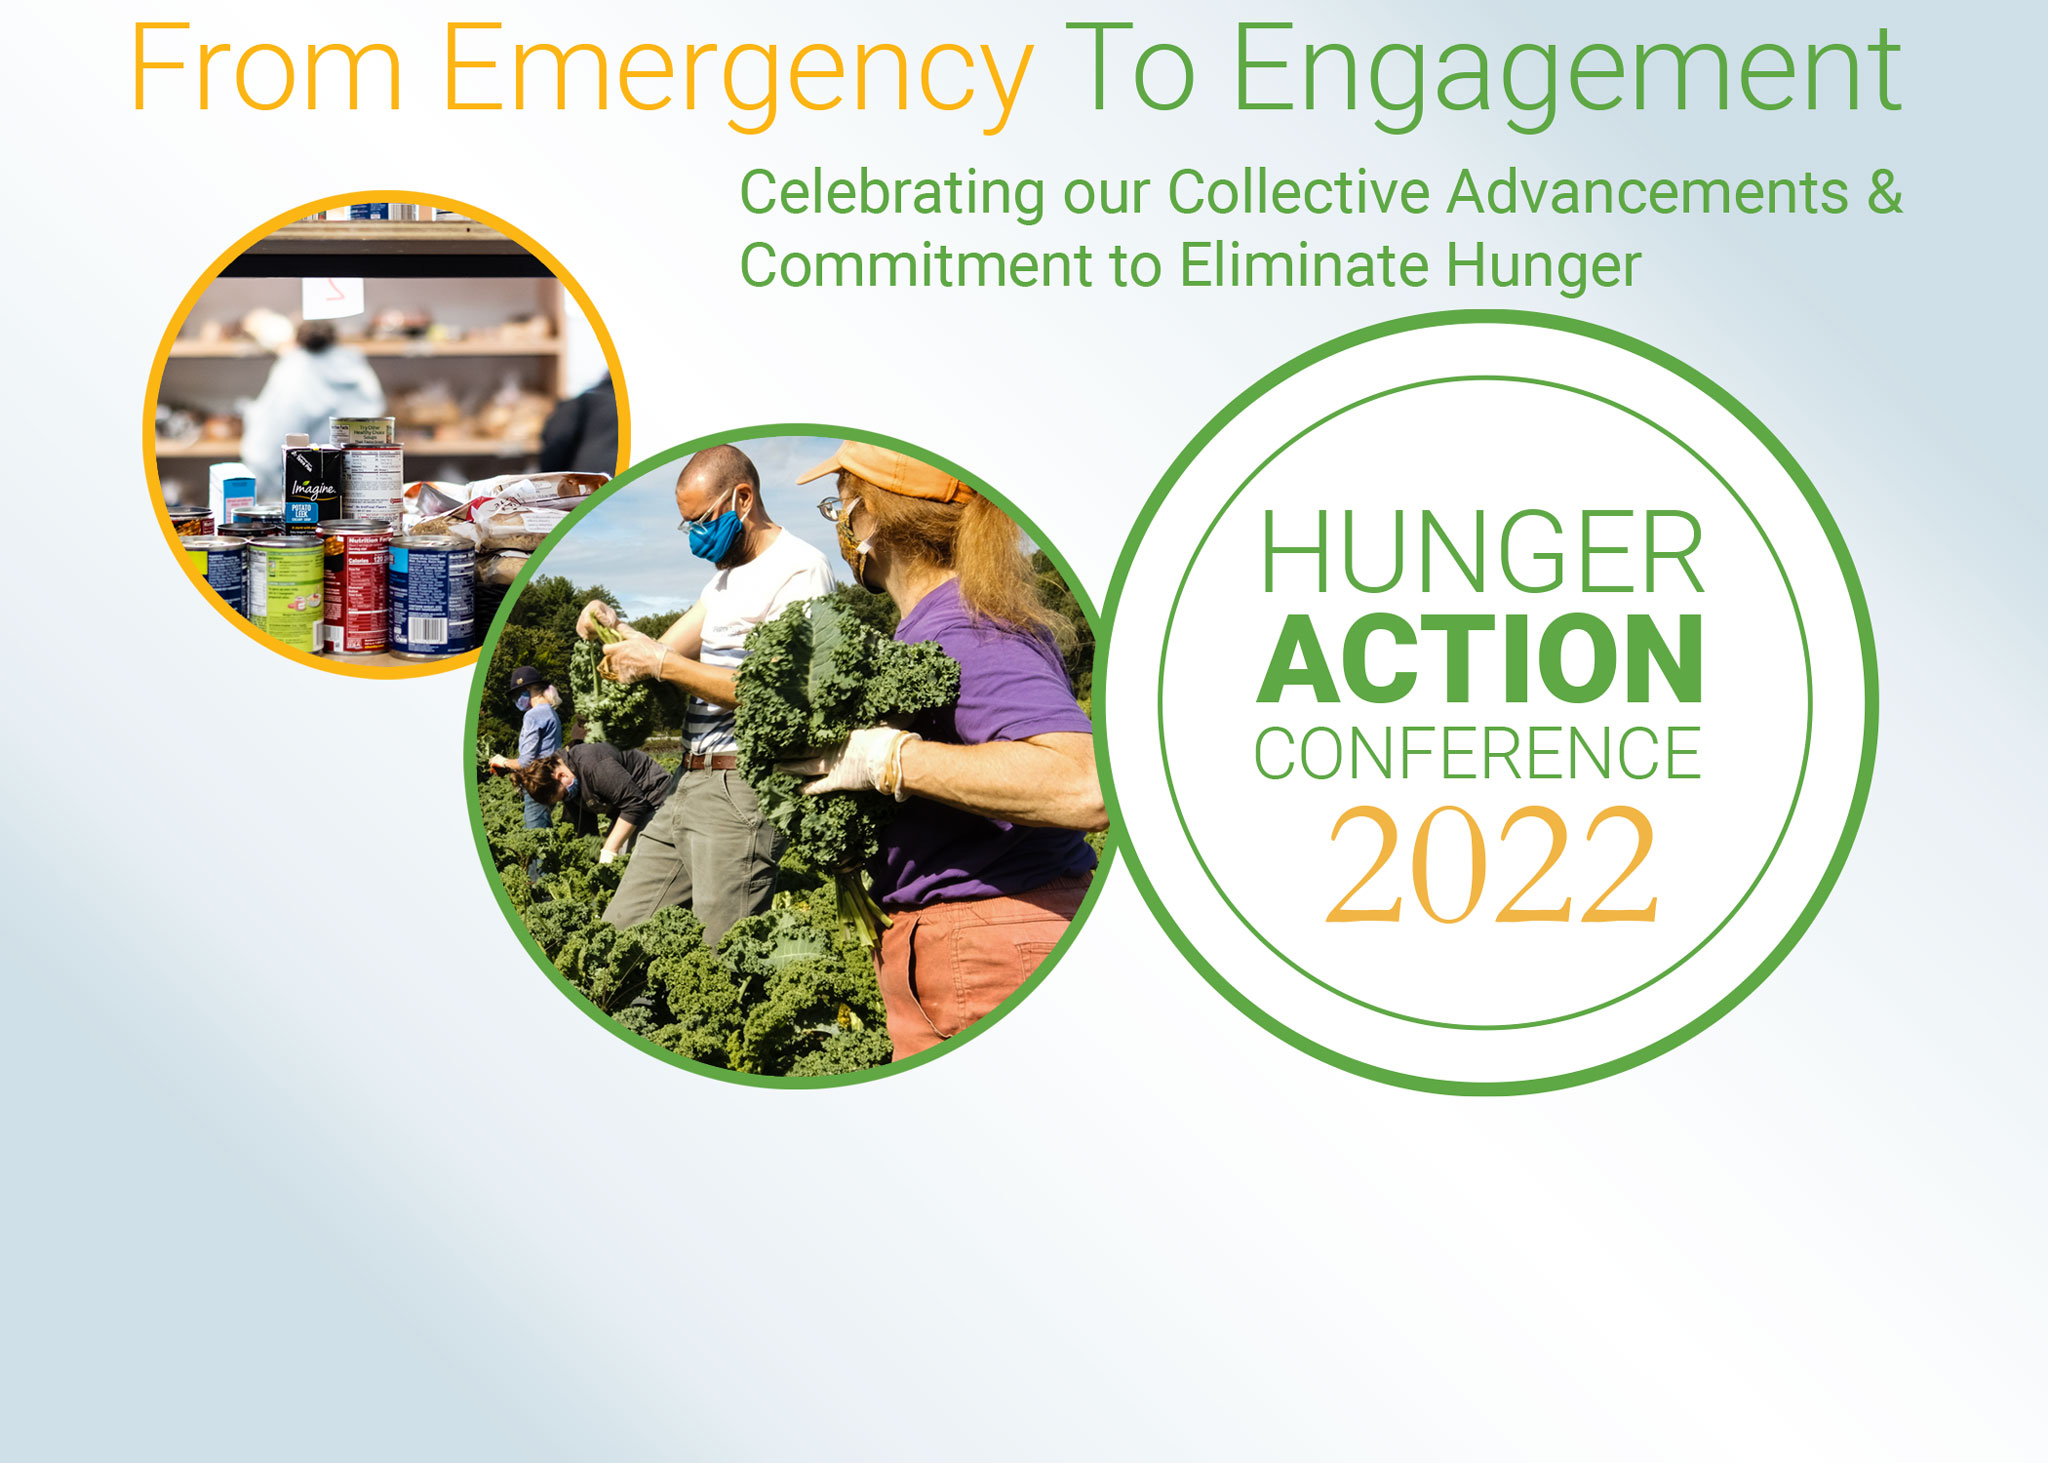 Photo of food shelf, gleaners in a field, and text reading "Hunger Action Conference 2022, From Emergency to Engagement: Celebrating Our Collective Advancements and Commitment to Eliminate Hunger